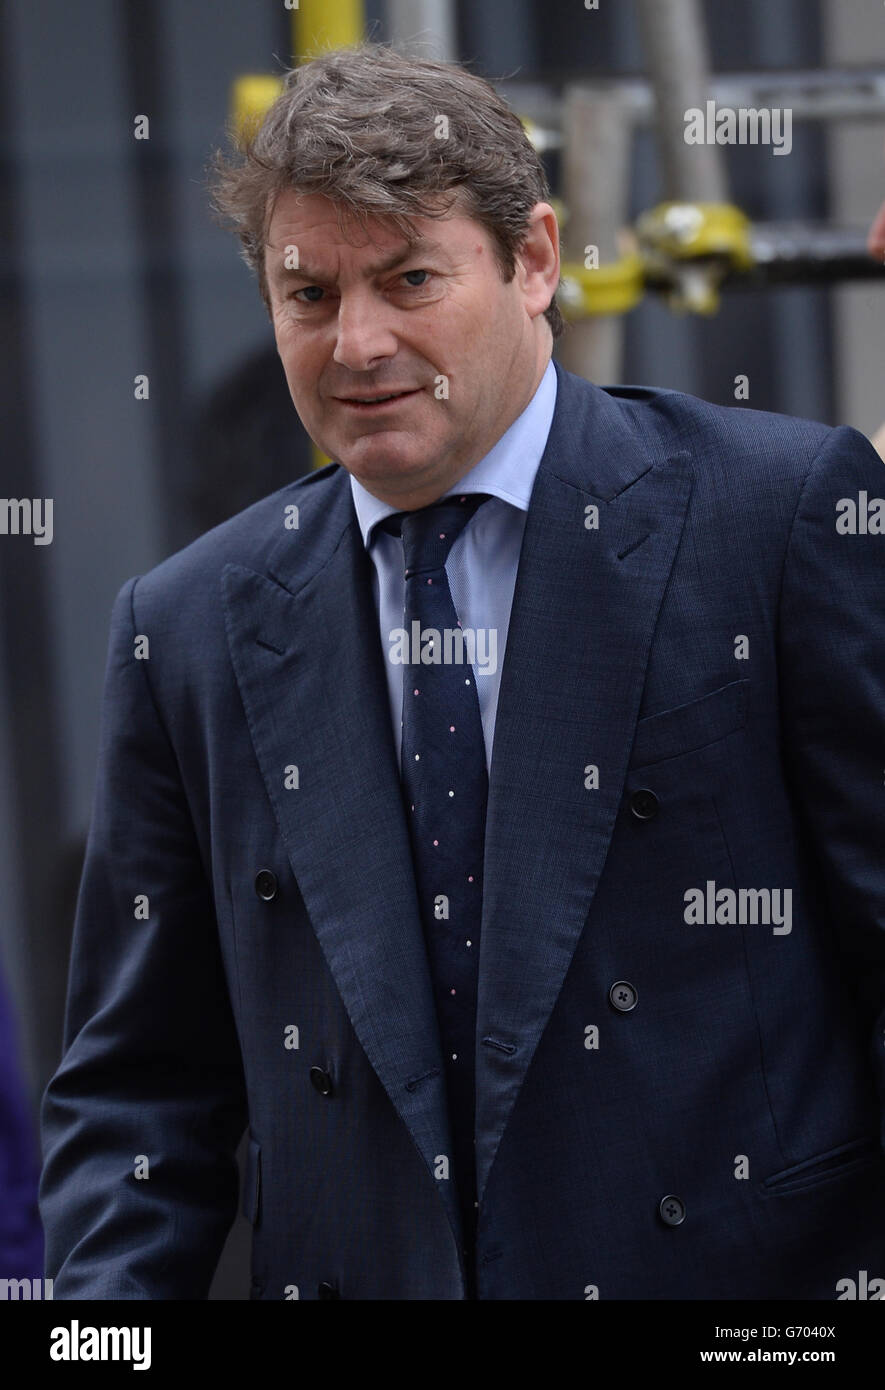 Charlie Brooks , the husband of former News International chief executive Rebekah Brooks, arrivies at the Old Bailey in London, as the phone hacking trial continues. Stock Photo